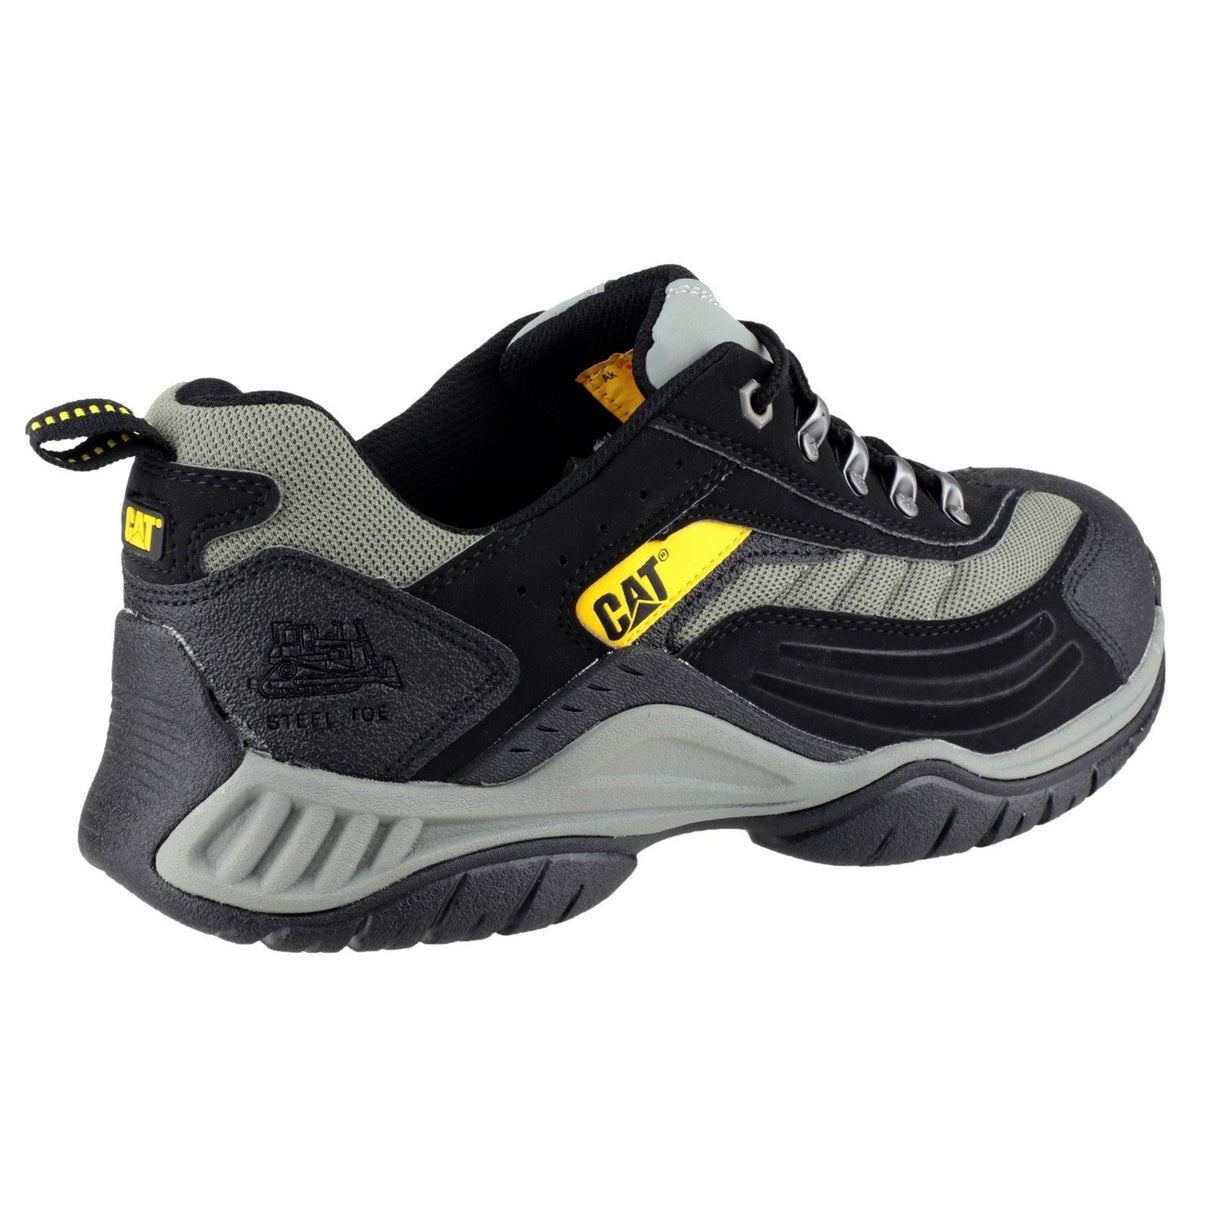 Caterpillar Moor Safety Shoes